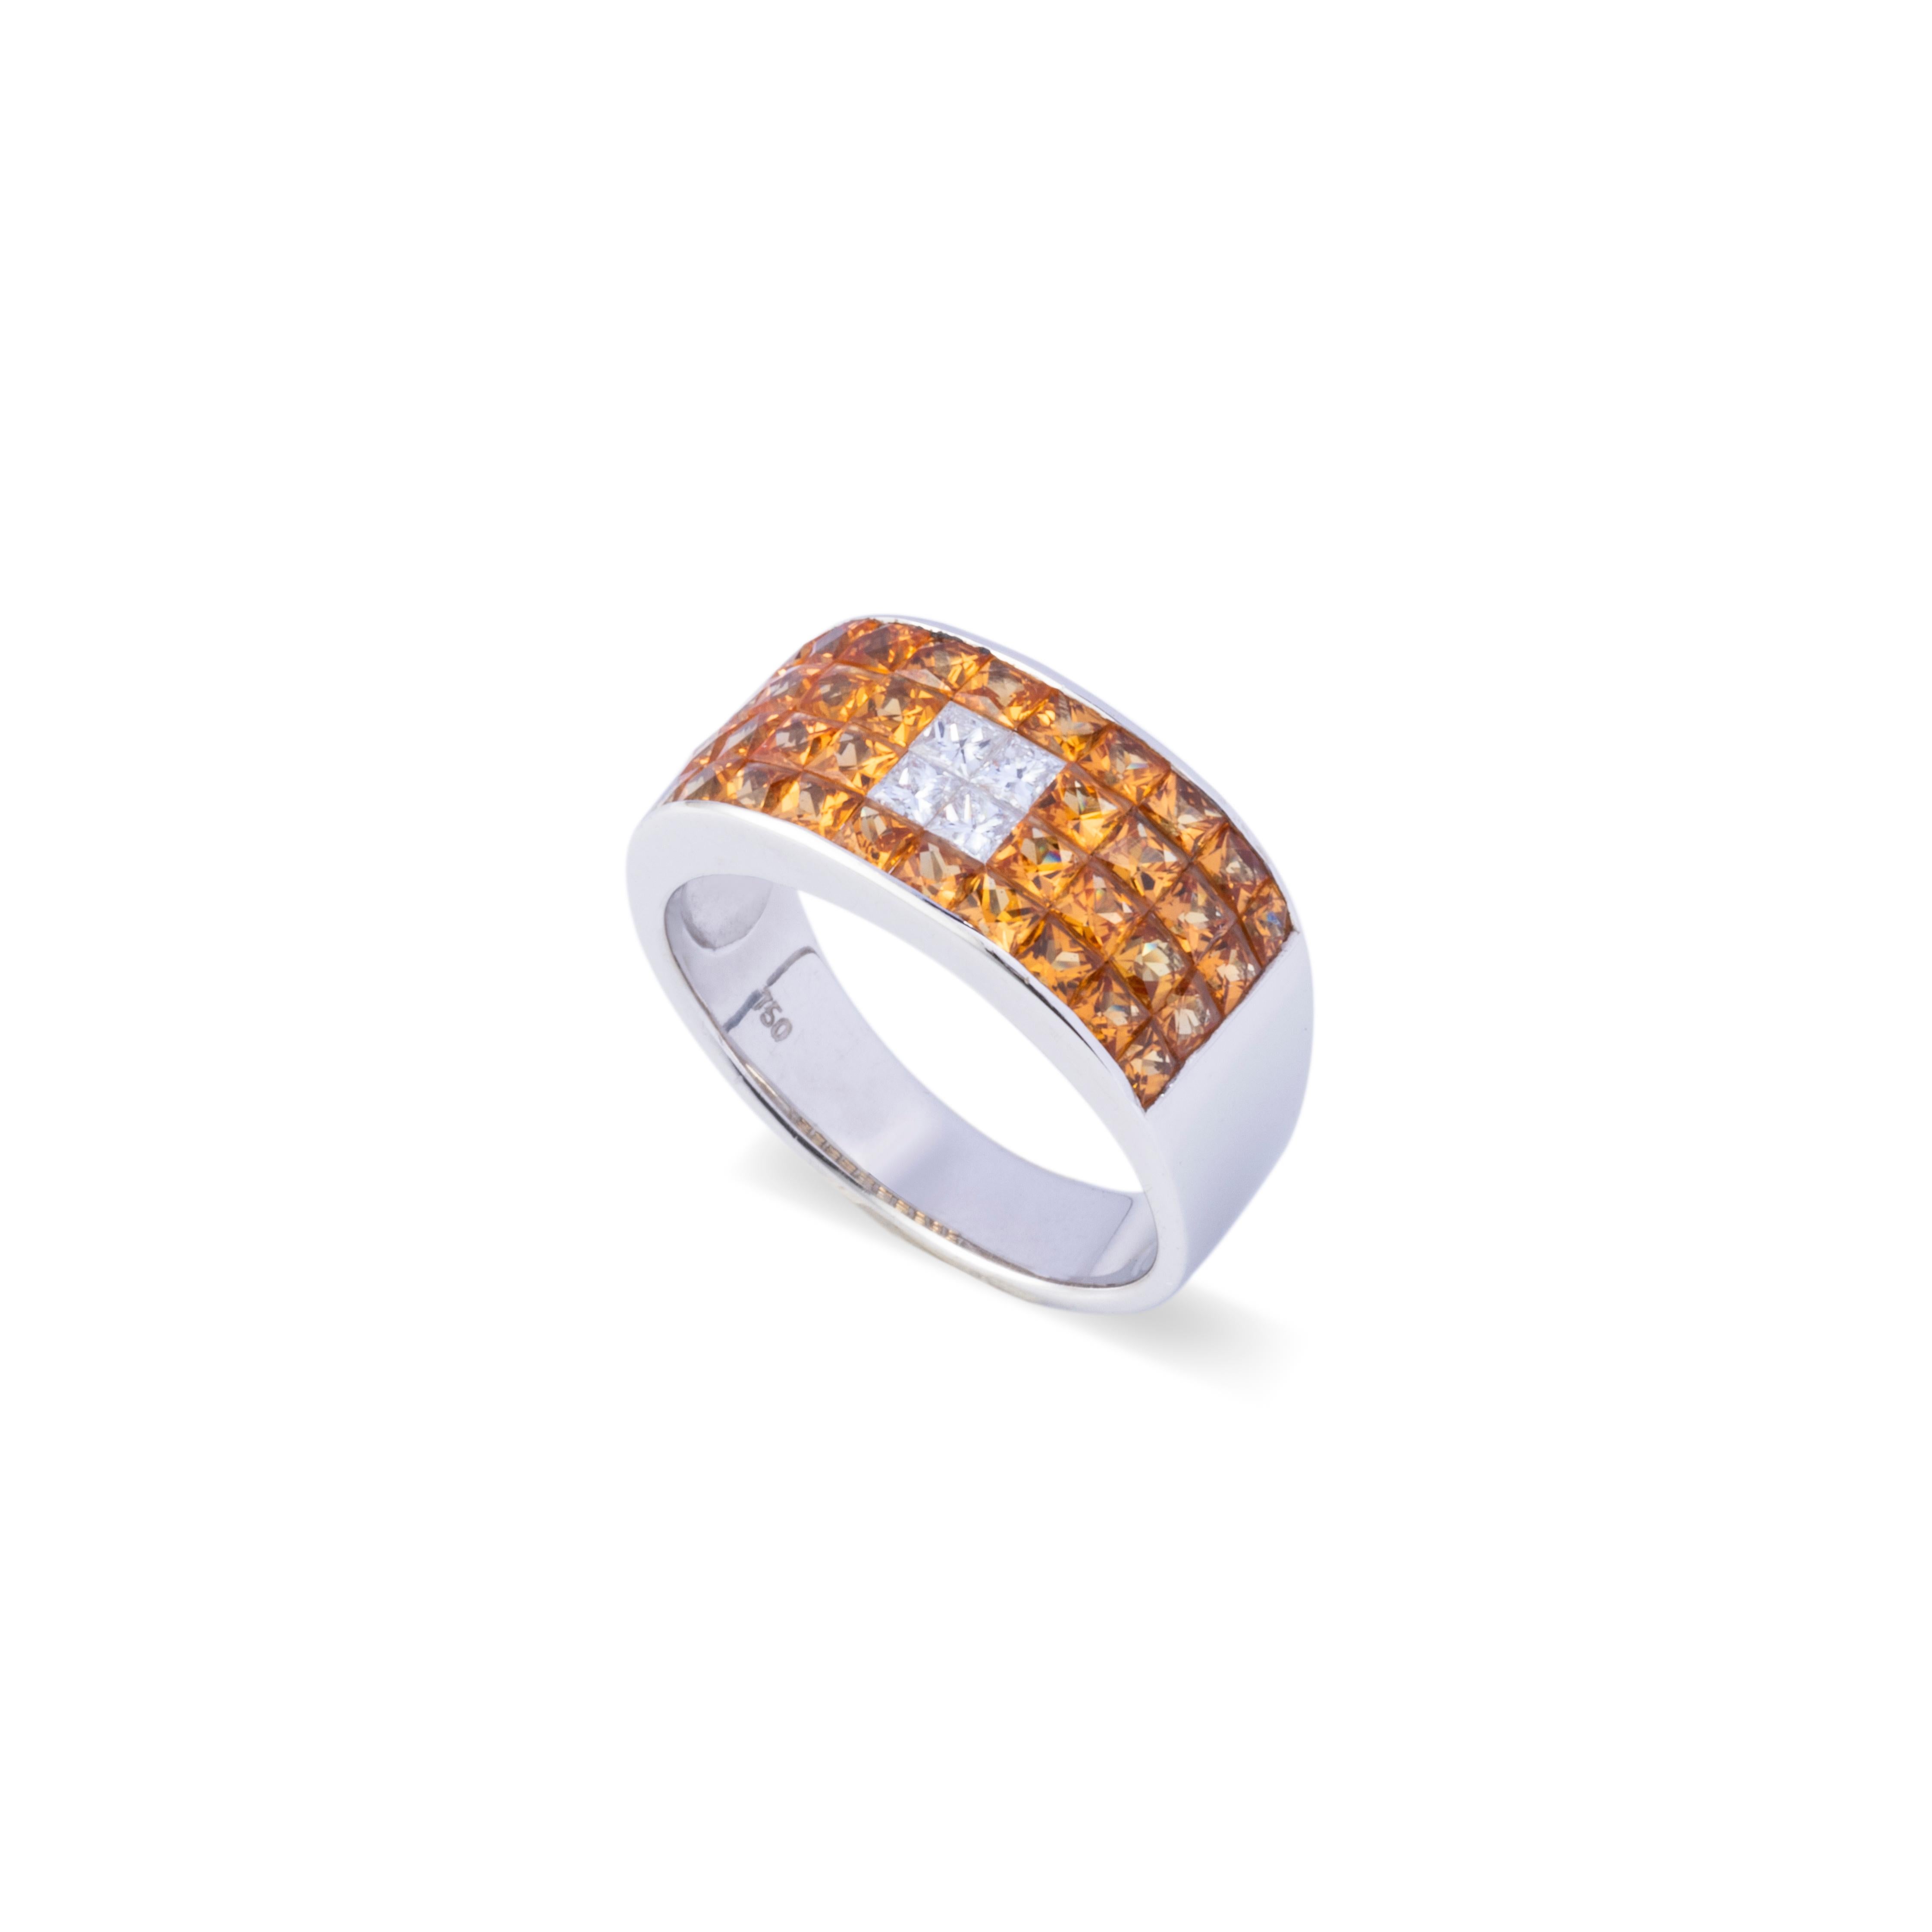 Auction Estimate:
$850 - $4,000

A gorgeous luxury Neo-vintage chunky thick band ring that is new and unworn. This ring is immaculately designed to be masculine and beautiful. The square cut yellow sapphire has a beautiful orangish yellow hue (like